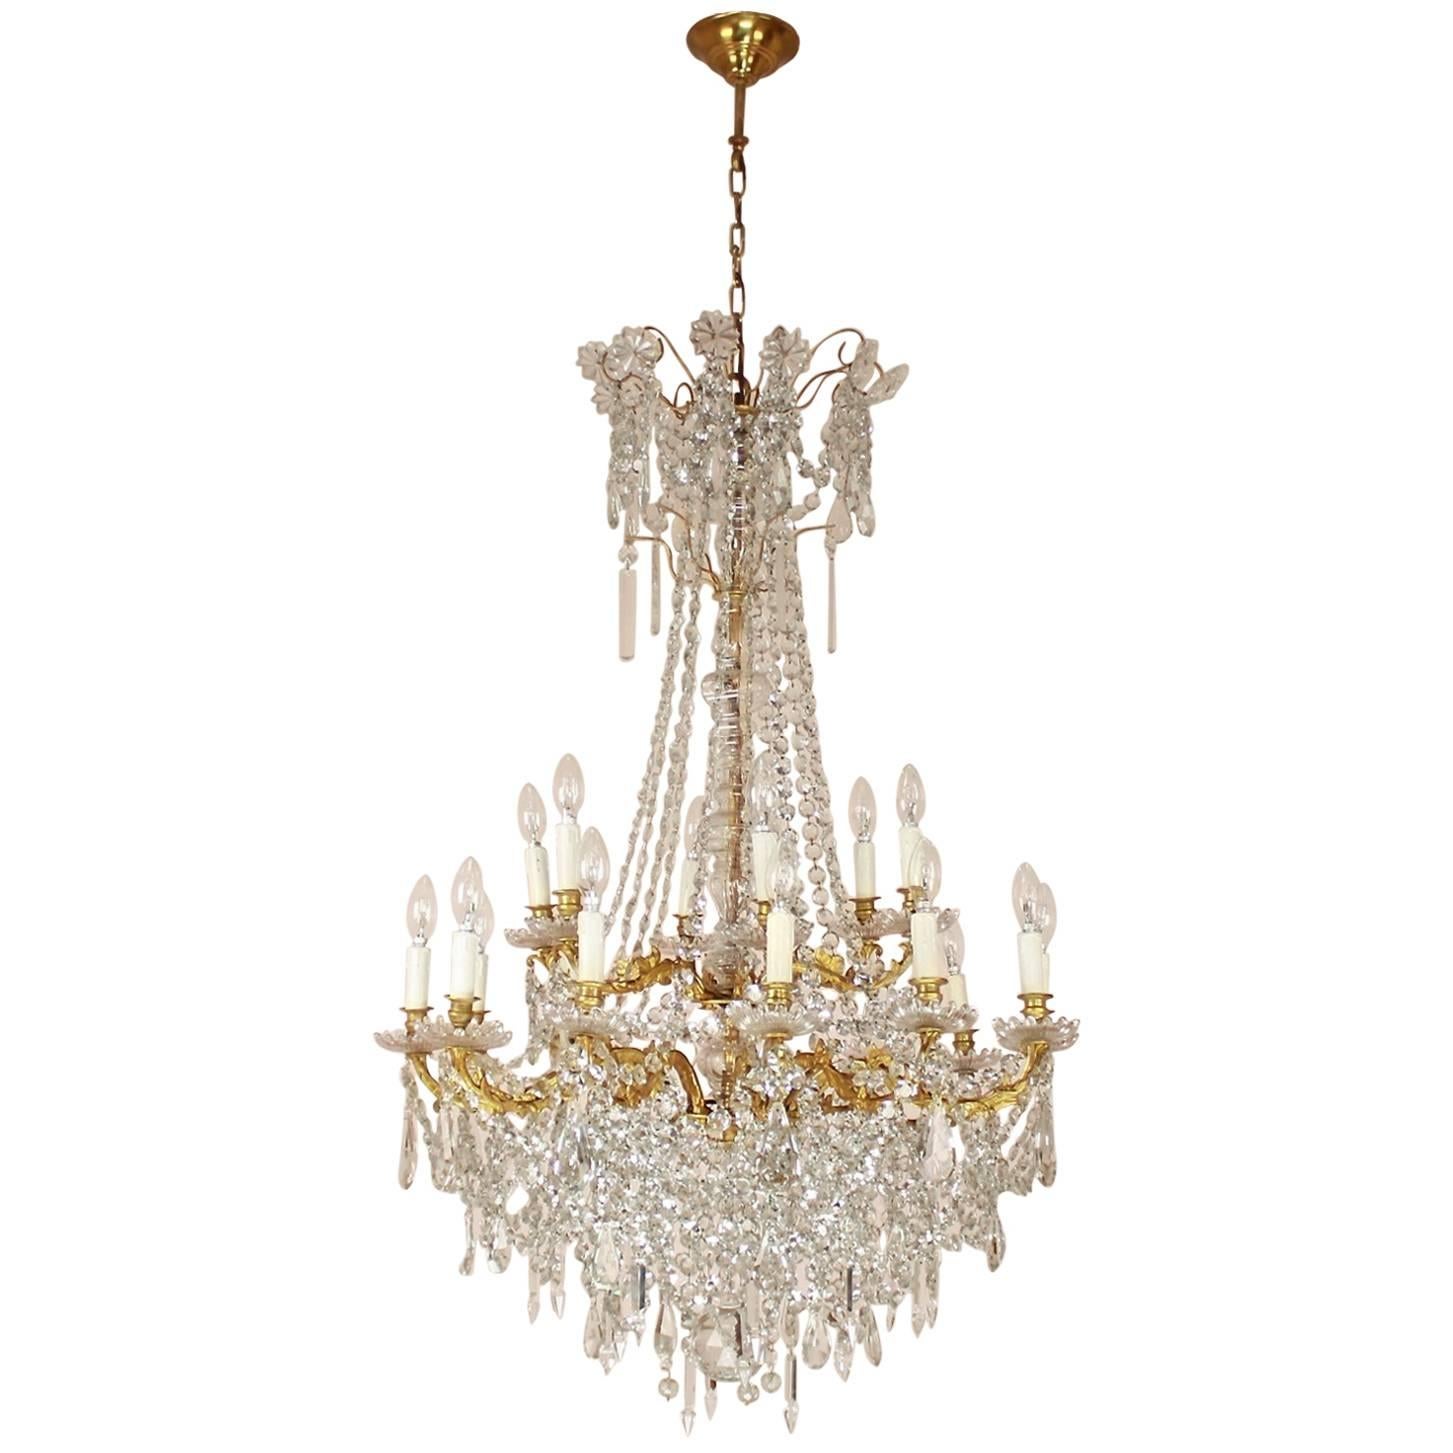 Large Louis XV Style Gilt-Bronze and Cut-Crystal Eighteen-Light Chandelier